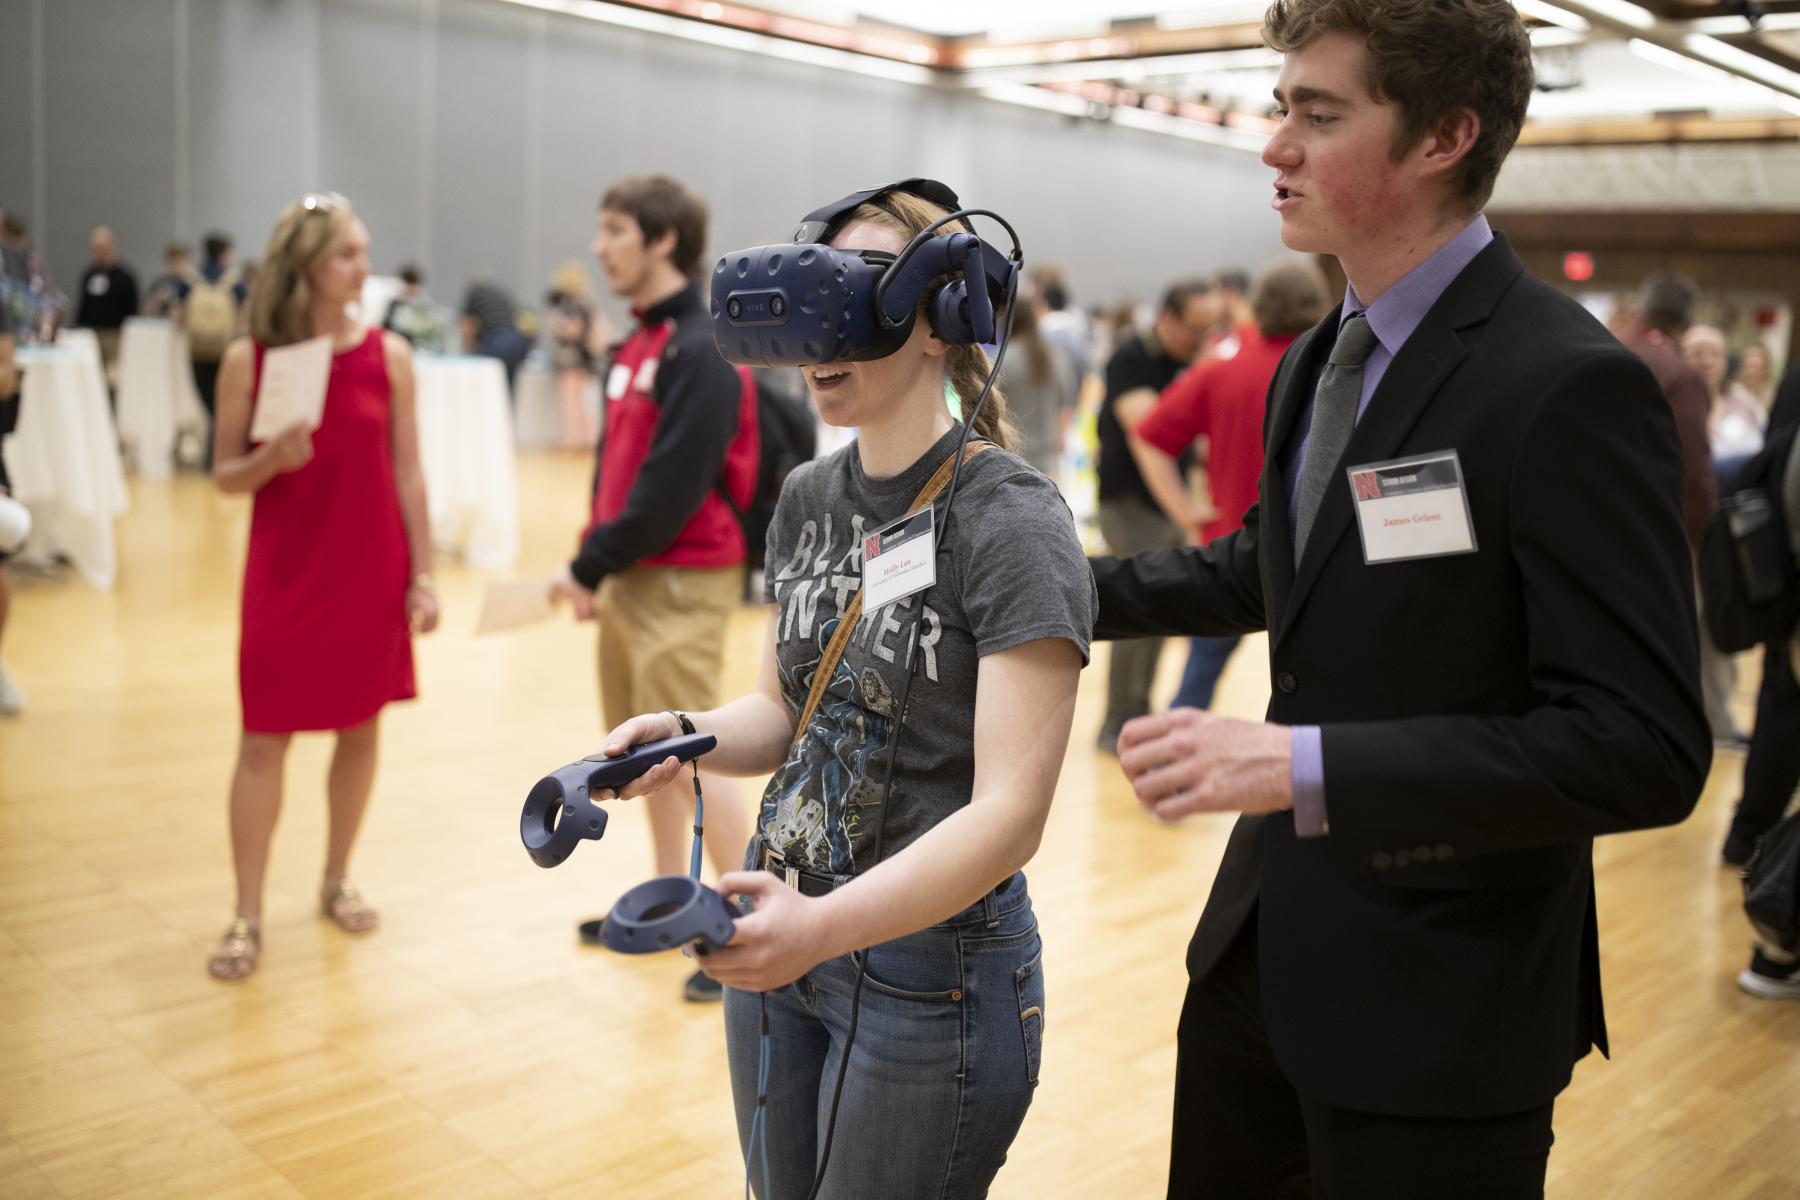 A student demos a VR project at the 2019 Senior Design Showcase.